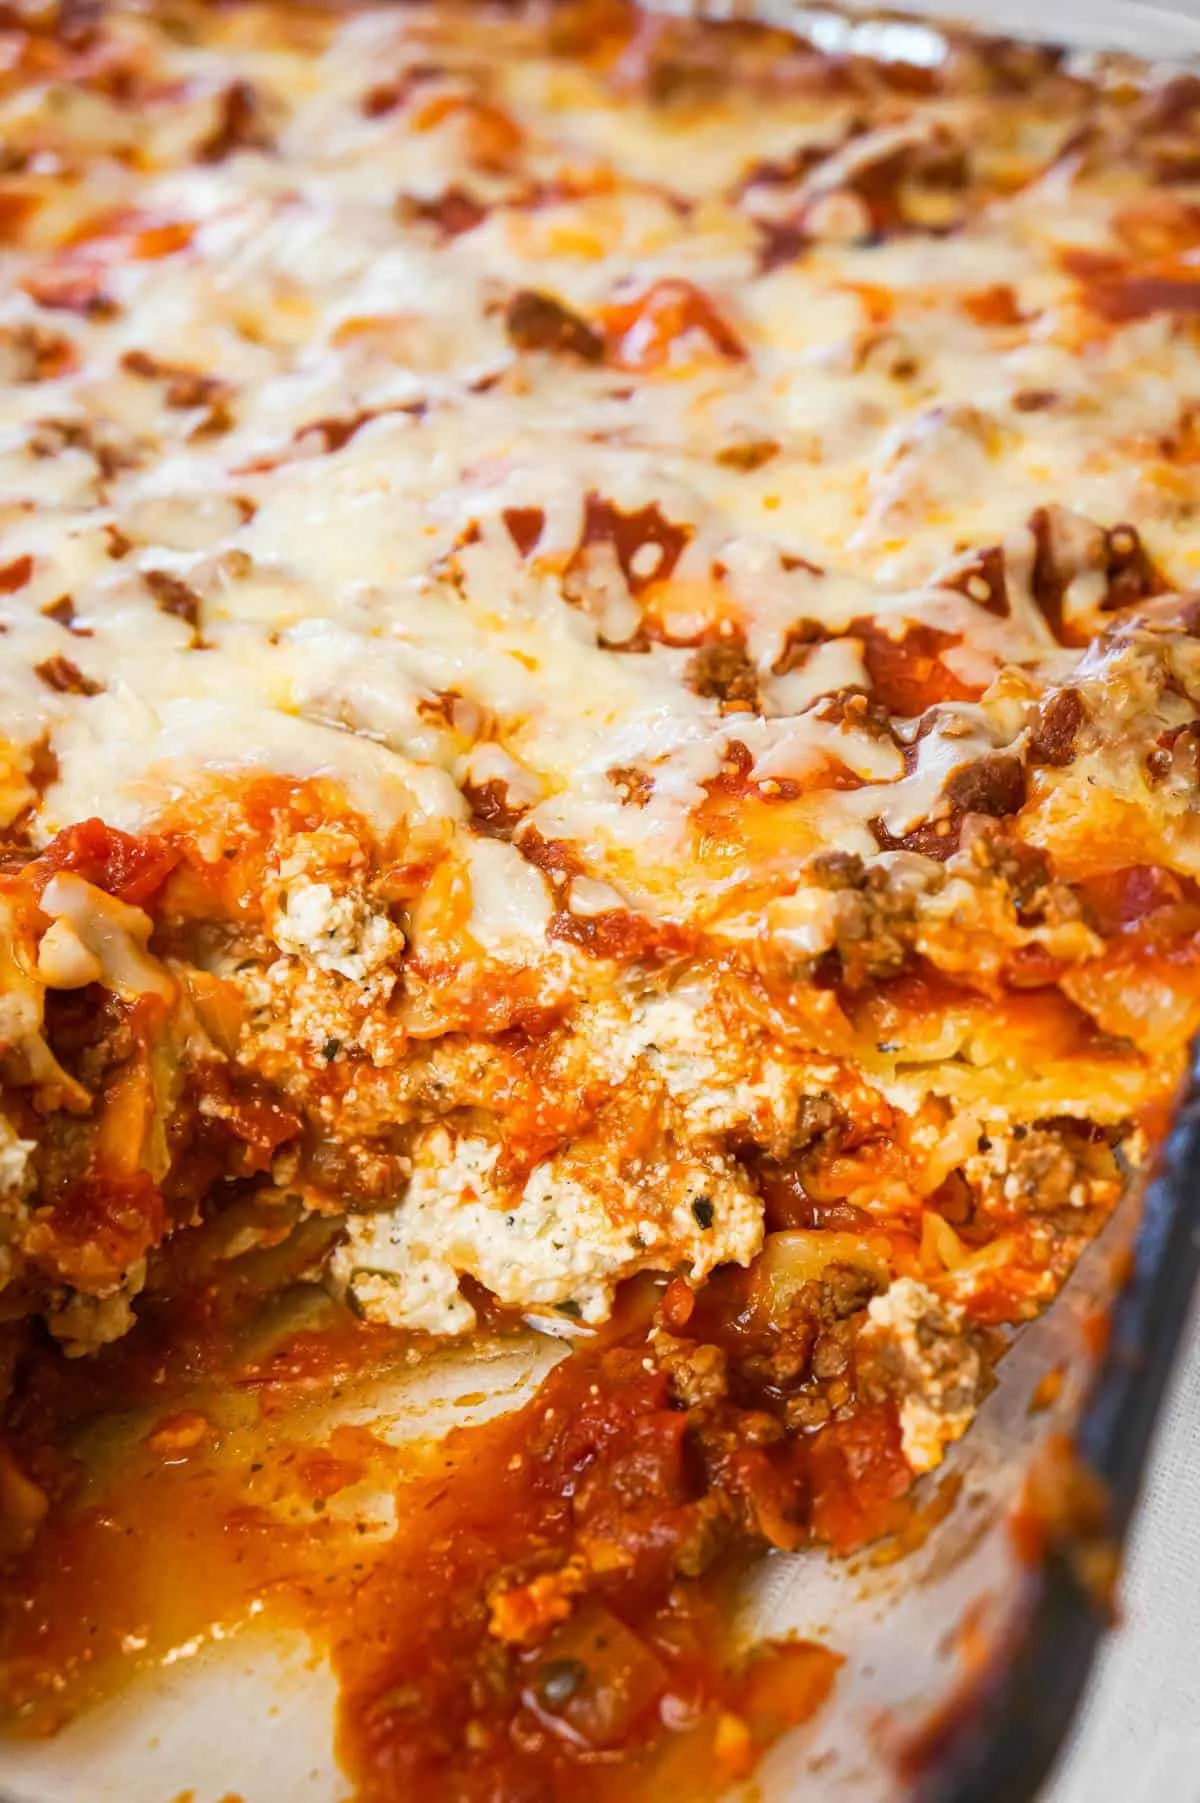 Lasagna with Ravioli is a simple and delicious twist on traditional lasagna made with frozen cheese ravioli, ground beef, marinara, ricotta and mozzarella cheese.